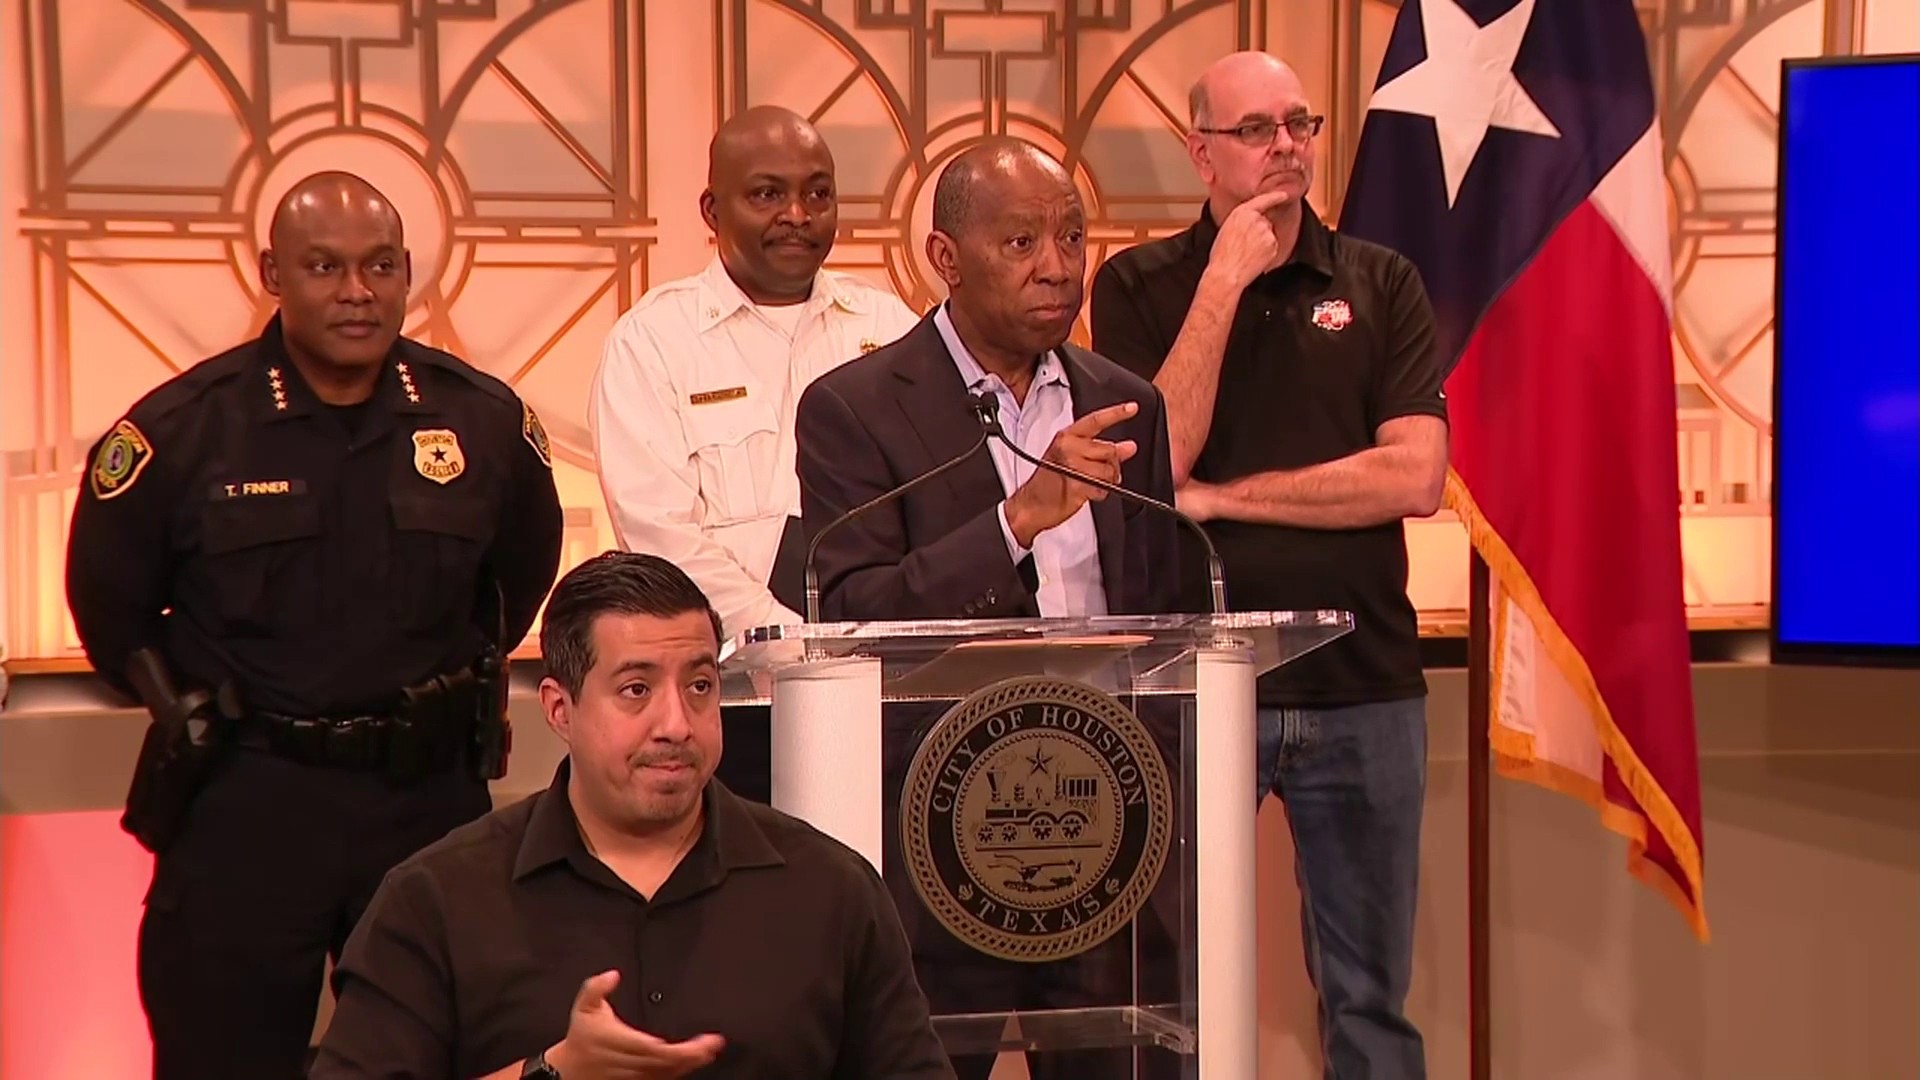 Mayor Turner encourages H-town to get 'fired up' for Houston